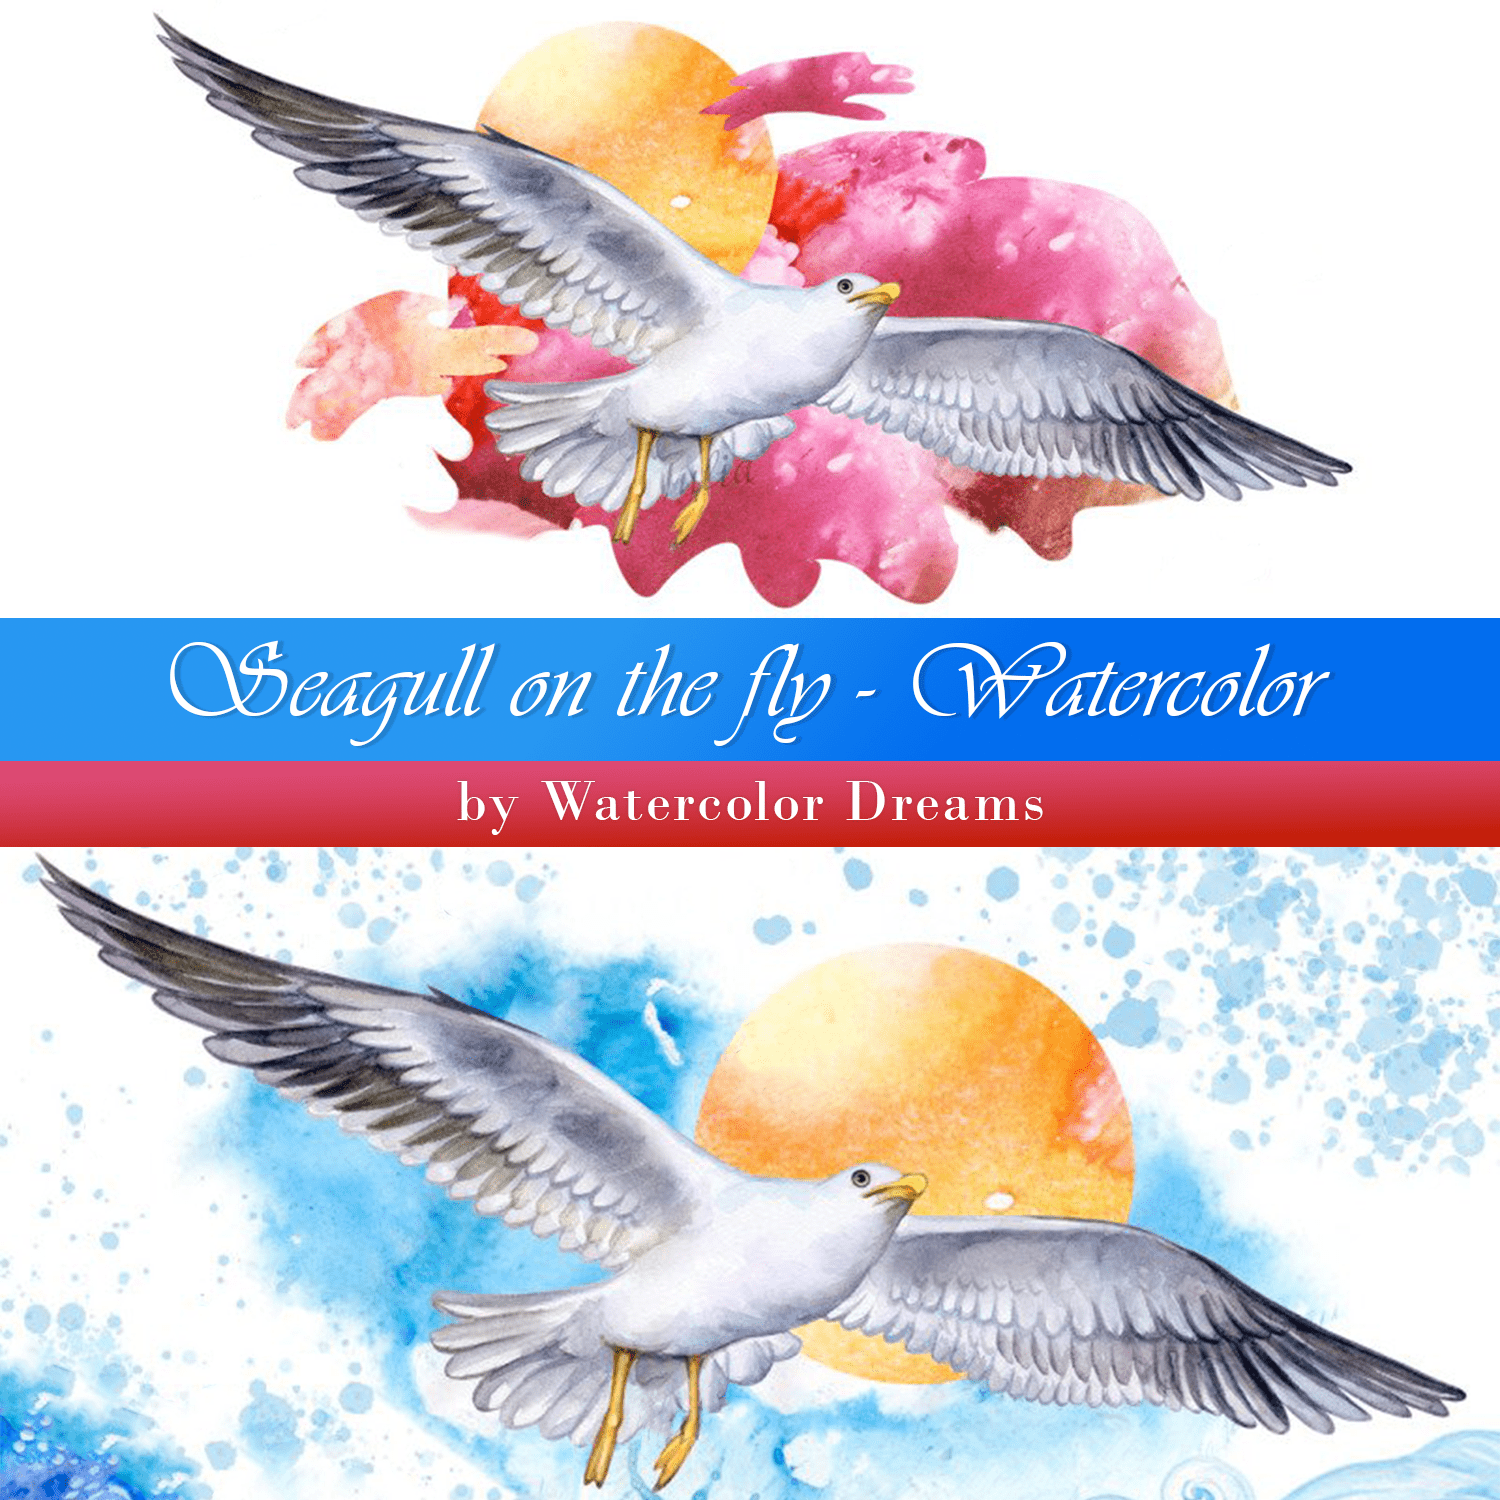 Seagull on the fly. Watercolor cover.